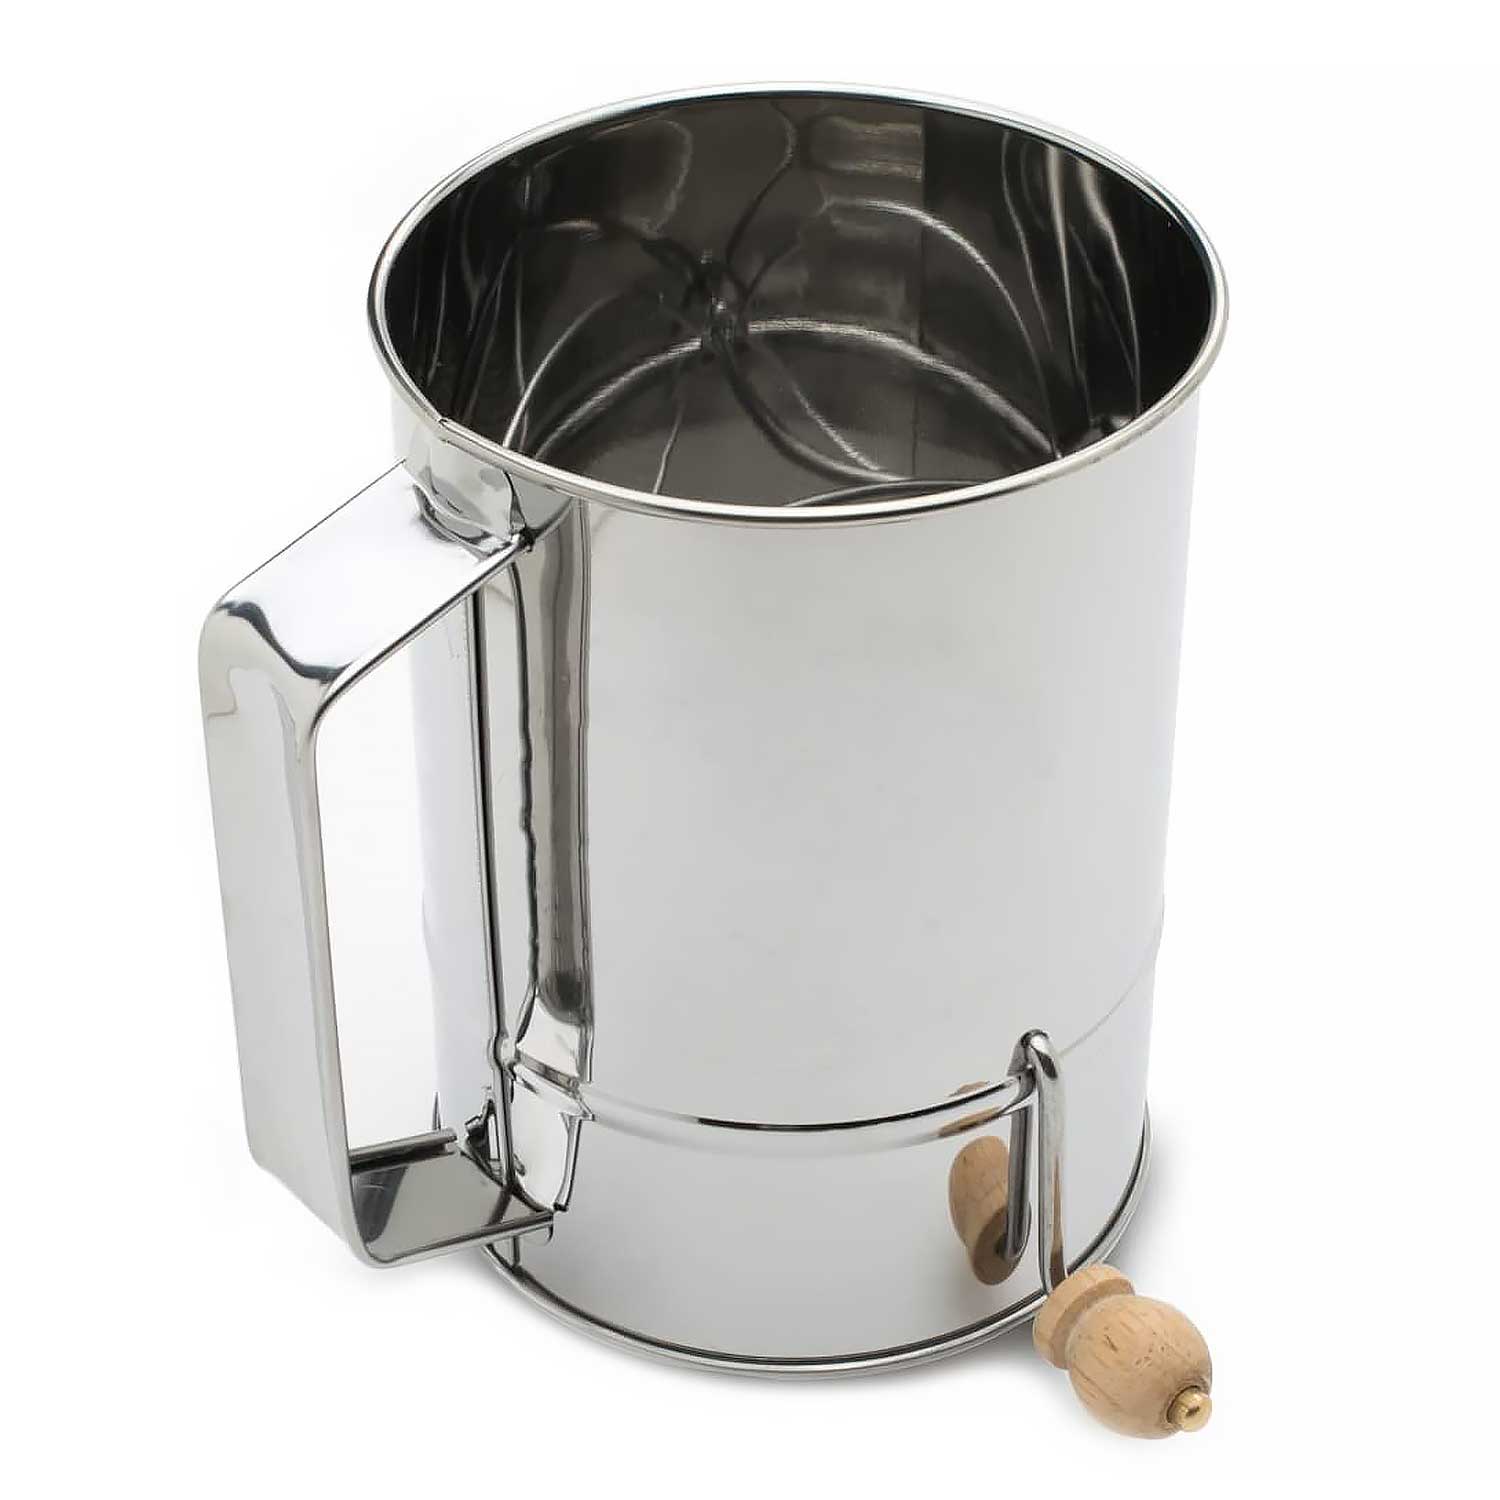 5 Cup Flour Sifter